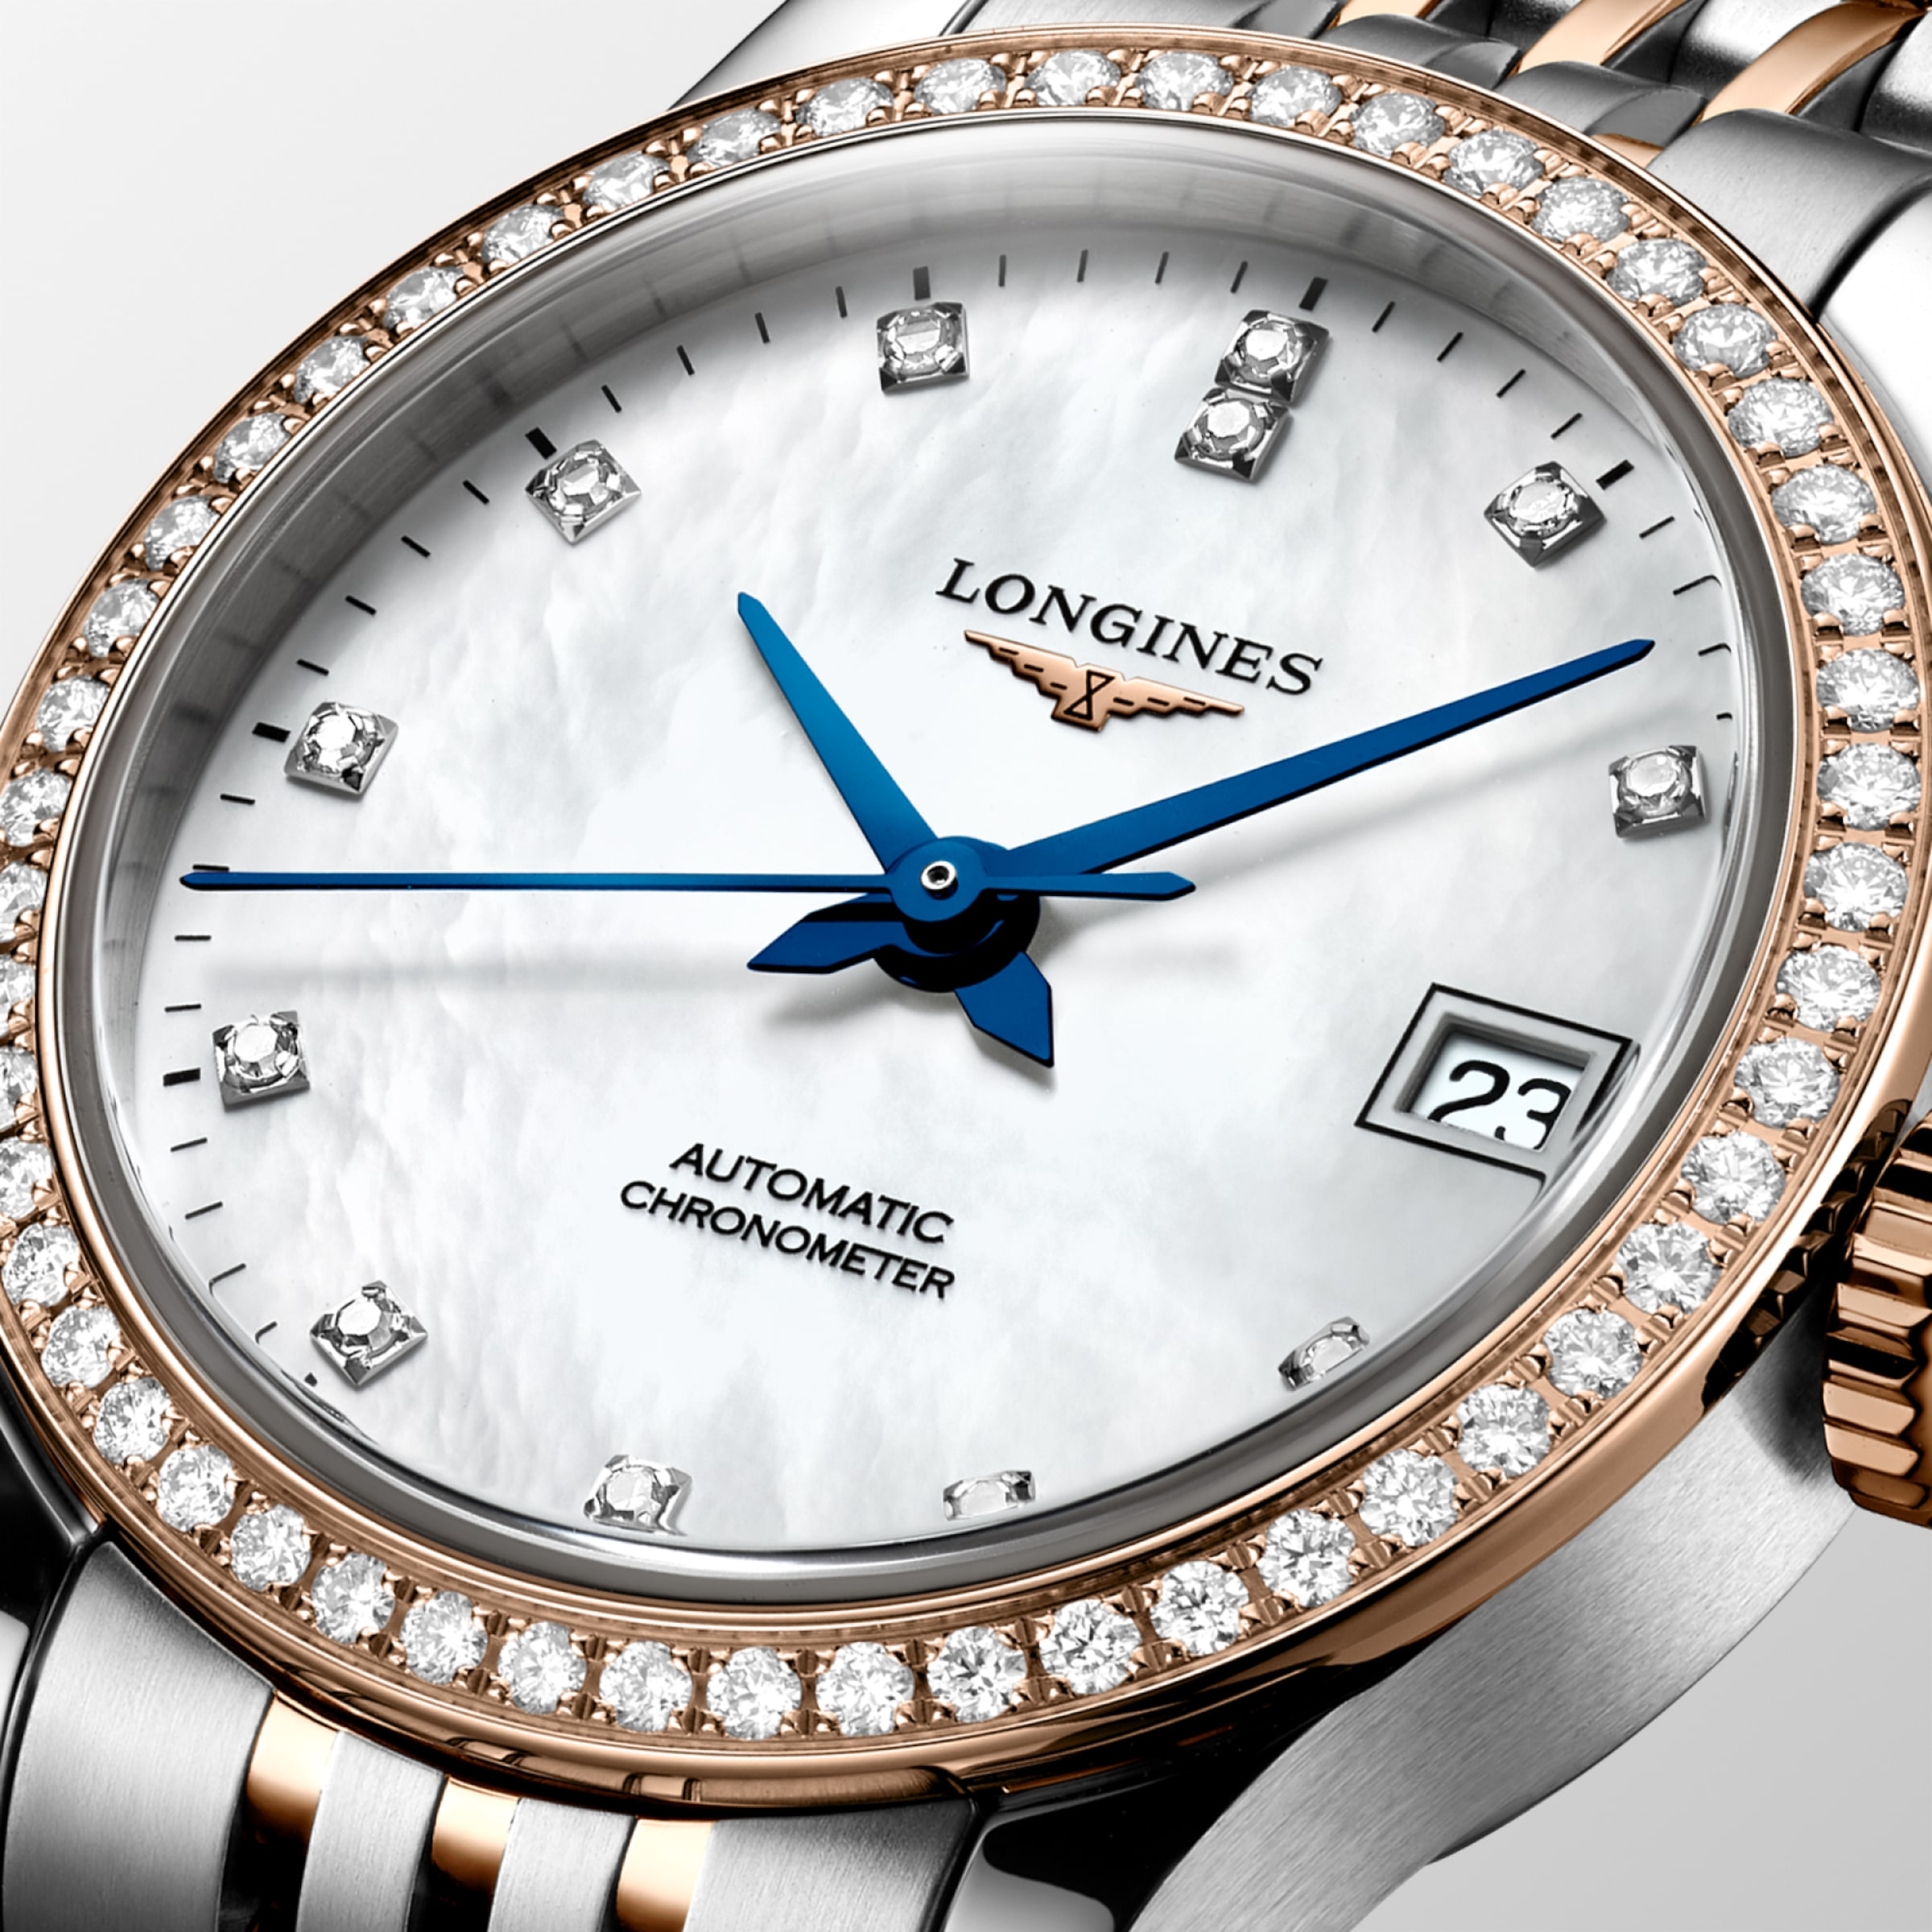 Longines RECORD Automatic Stainless steel and 18 karat pink gold Watch - L2.320.5.89.7